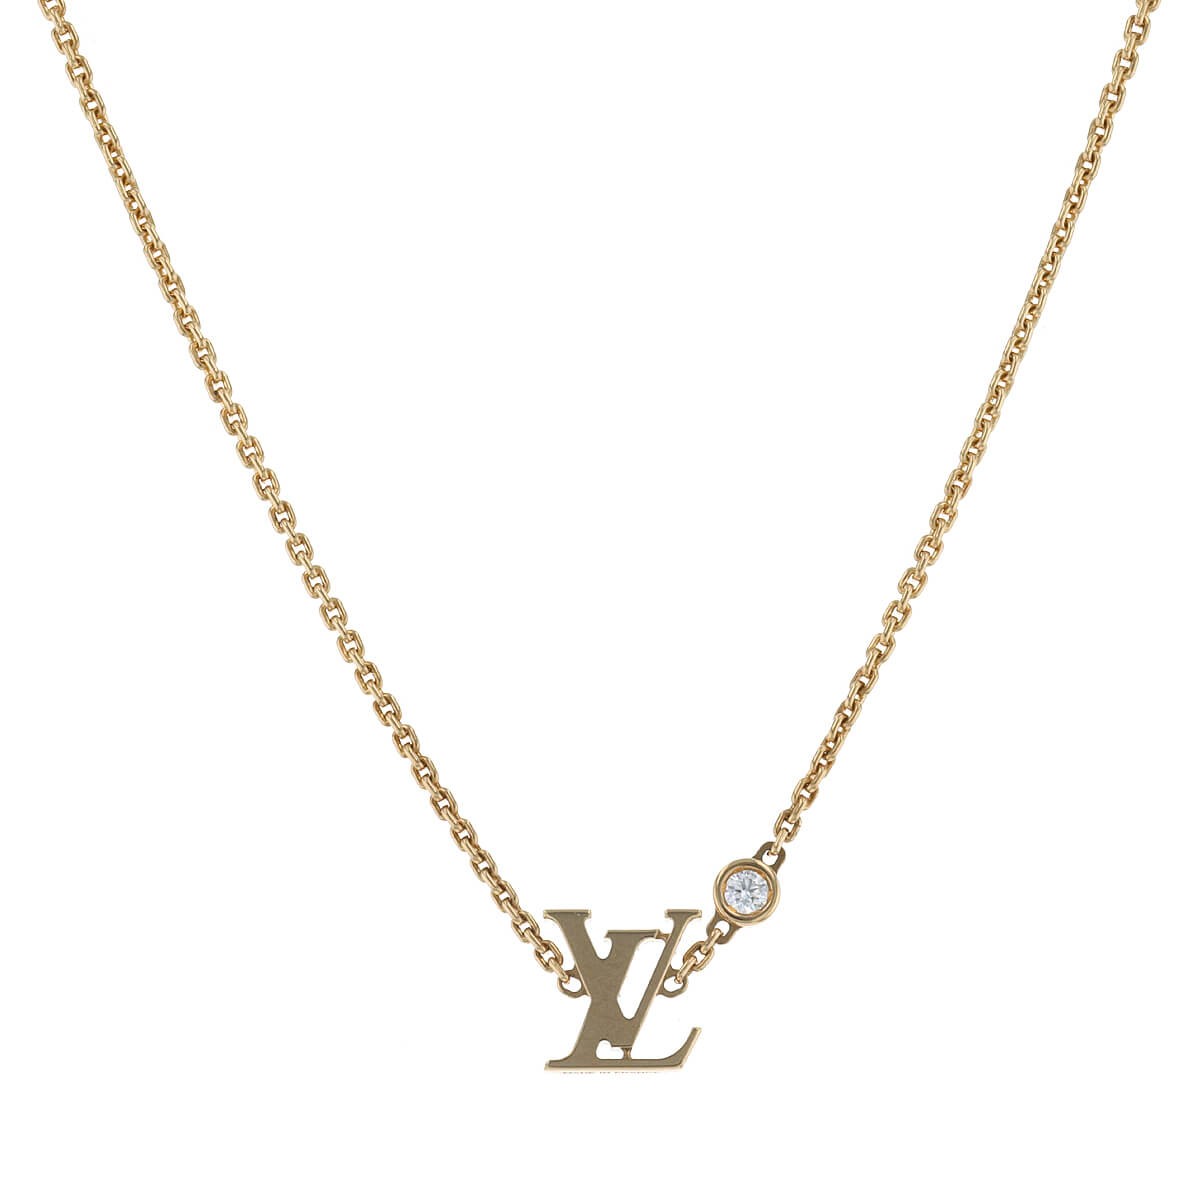 Louis Vuitton LV Idylle Blossom diamond and gold necklace